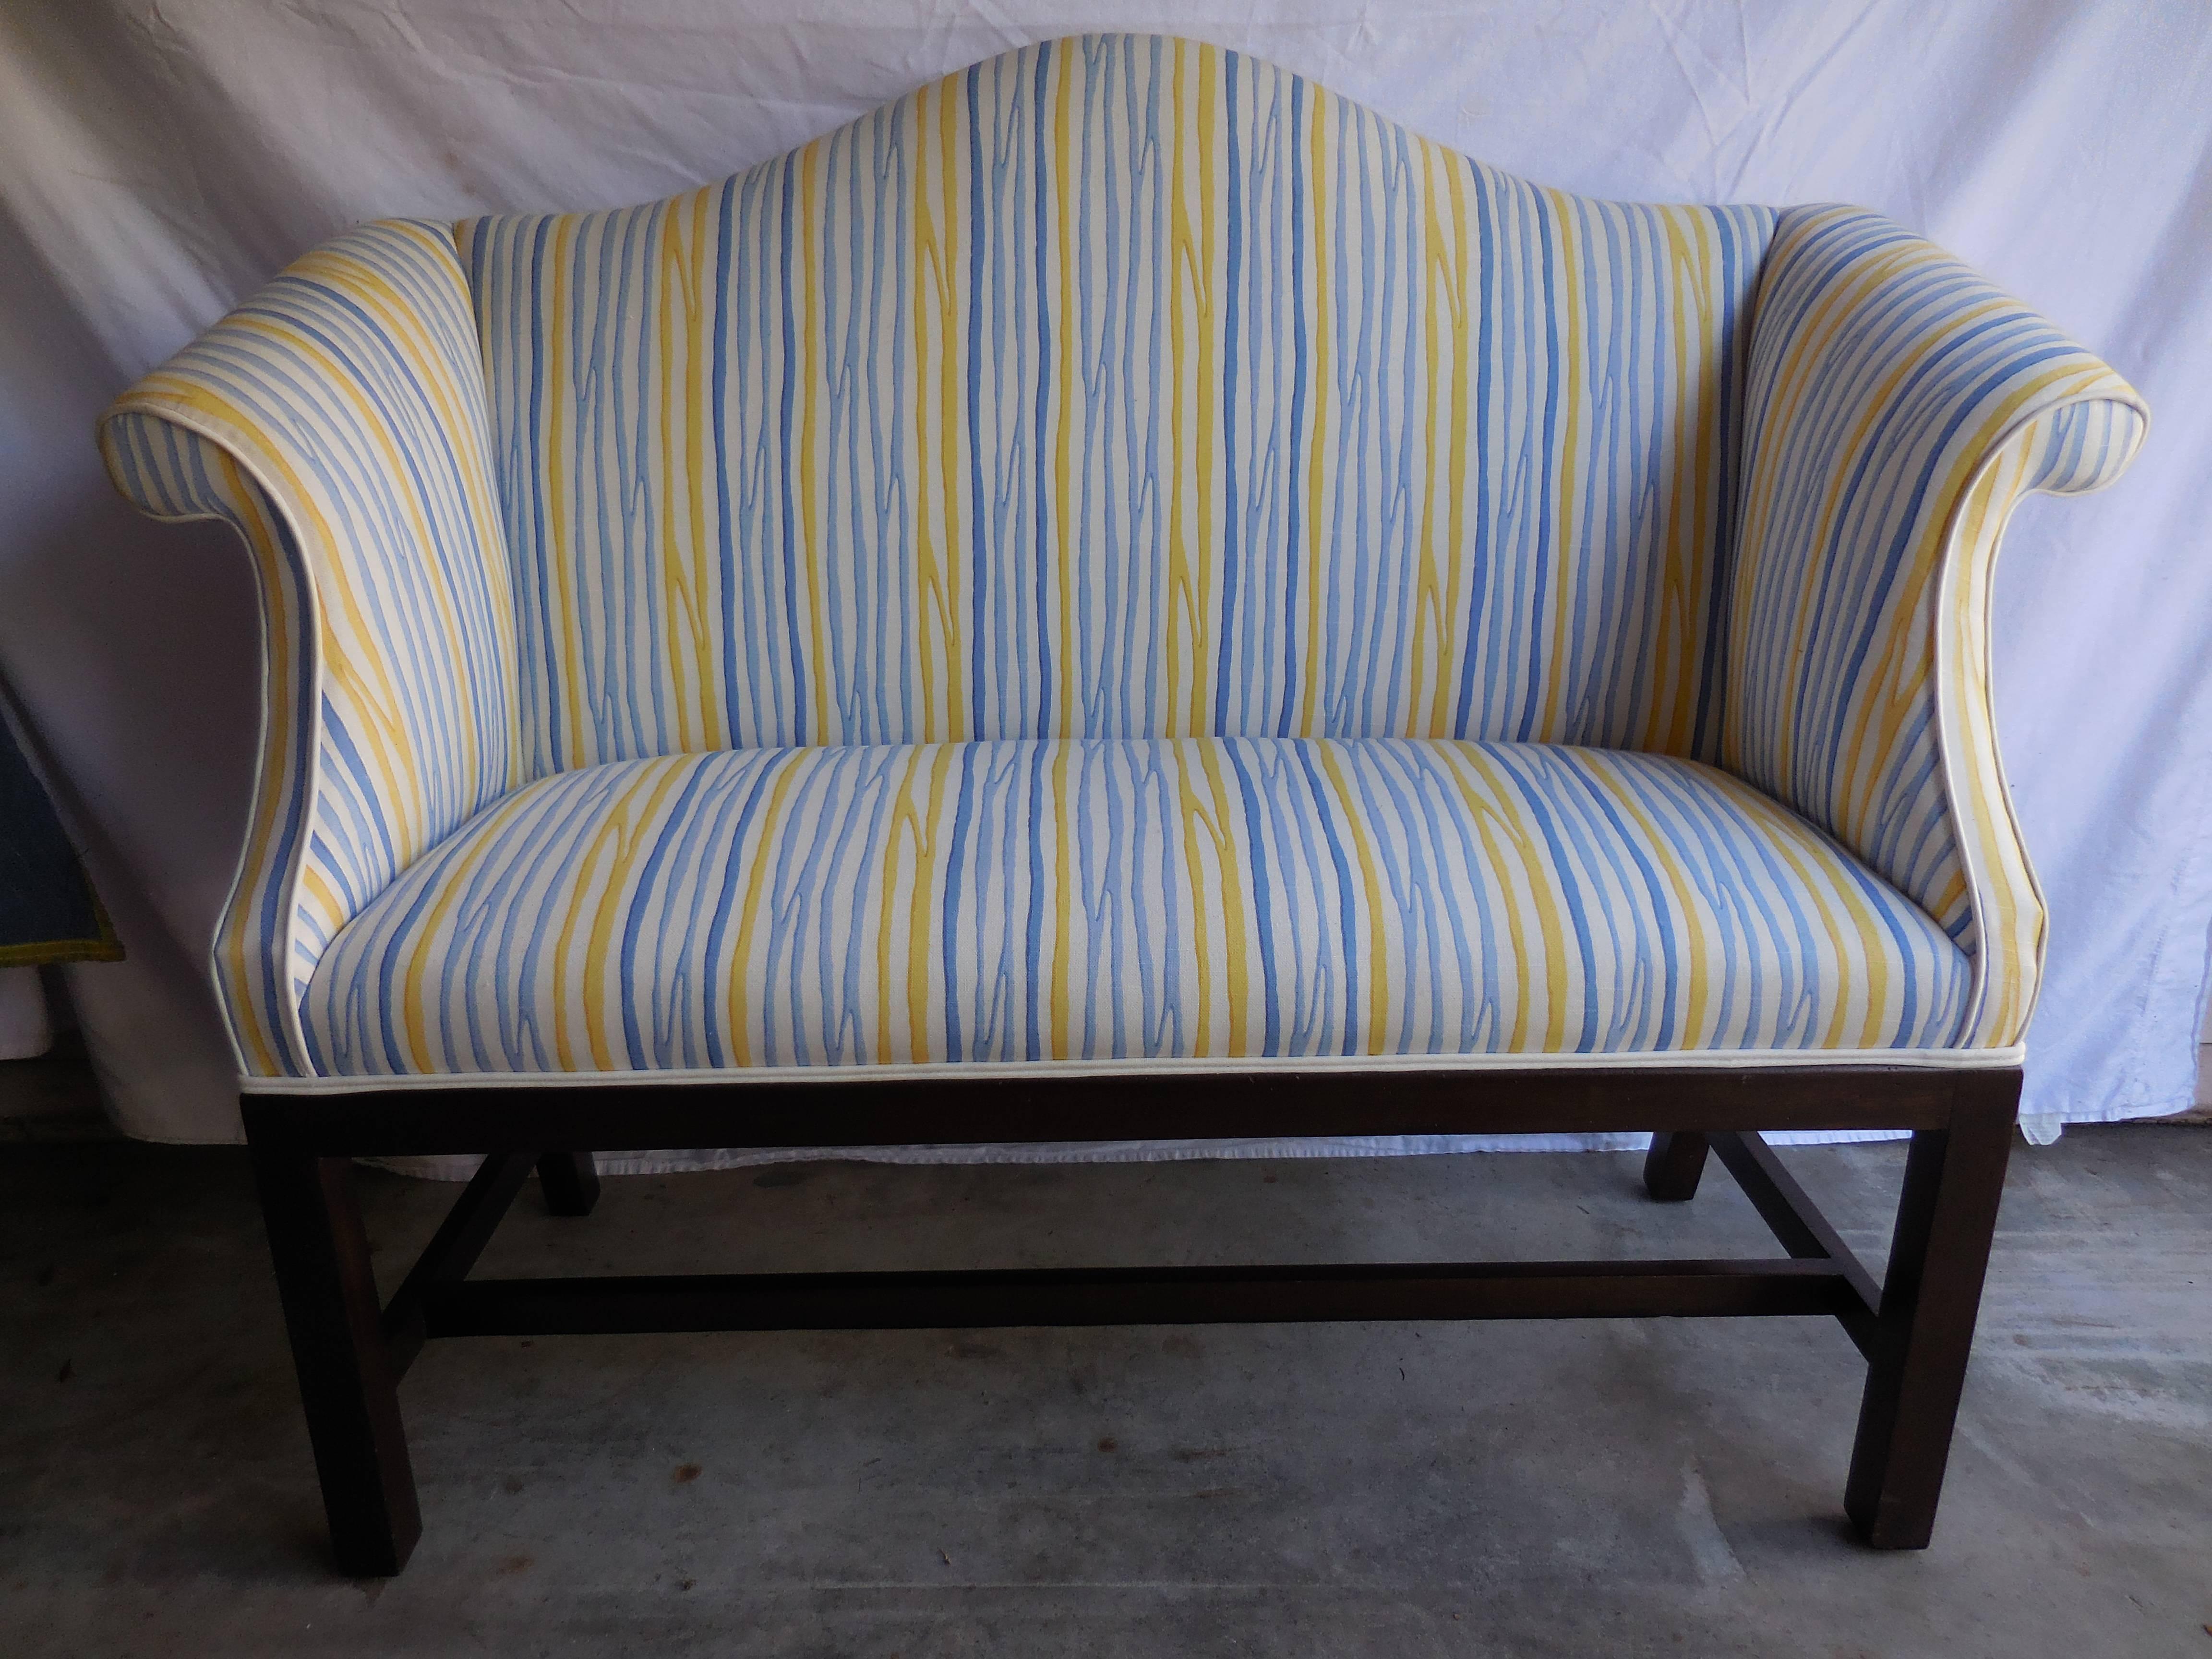 Small contemporary camelback settee re-upholstered in a gorgeous blue, white and yellow fabric. Great for an entry or foot of the bed.